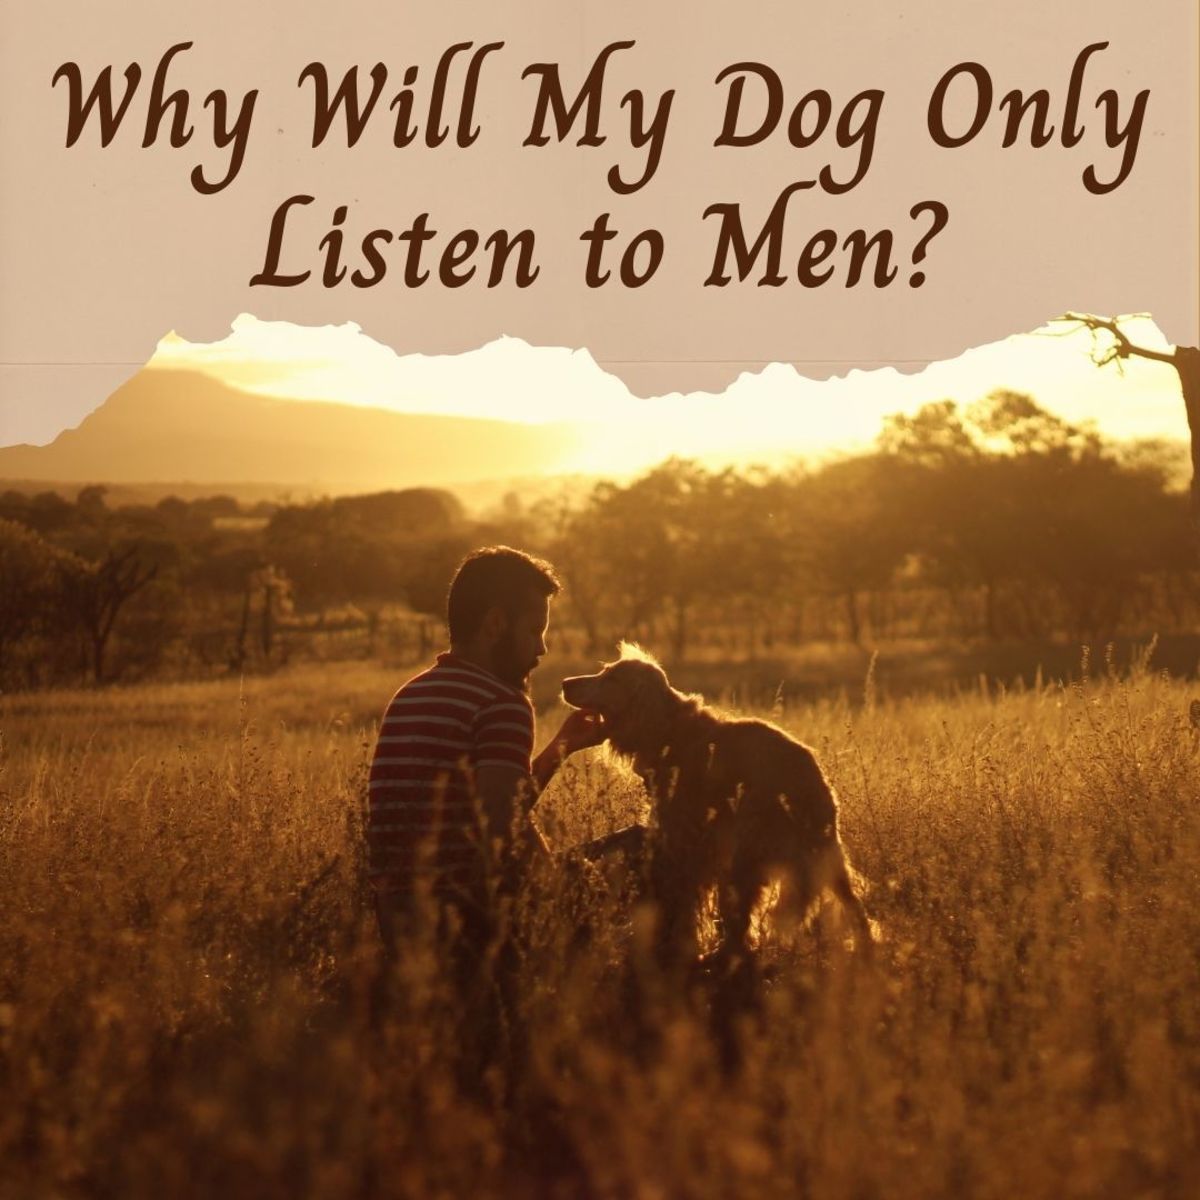 Why will your dog only listen to men?